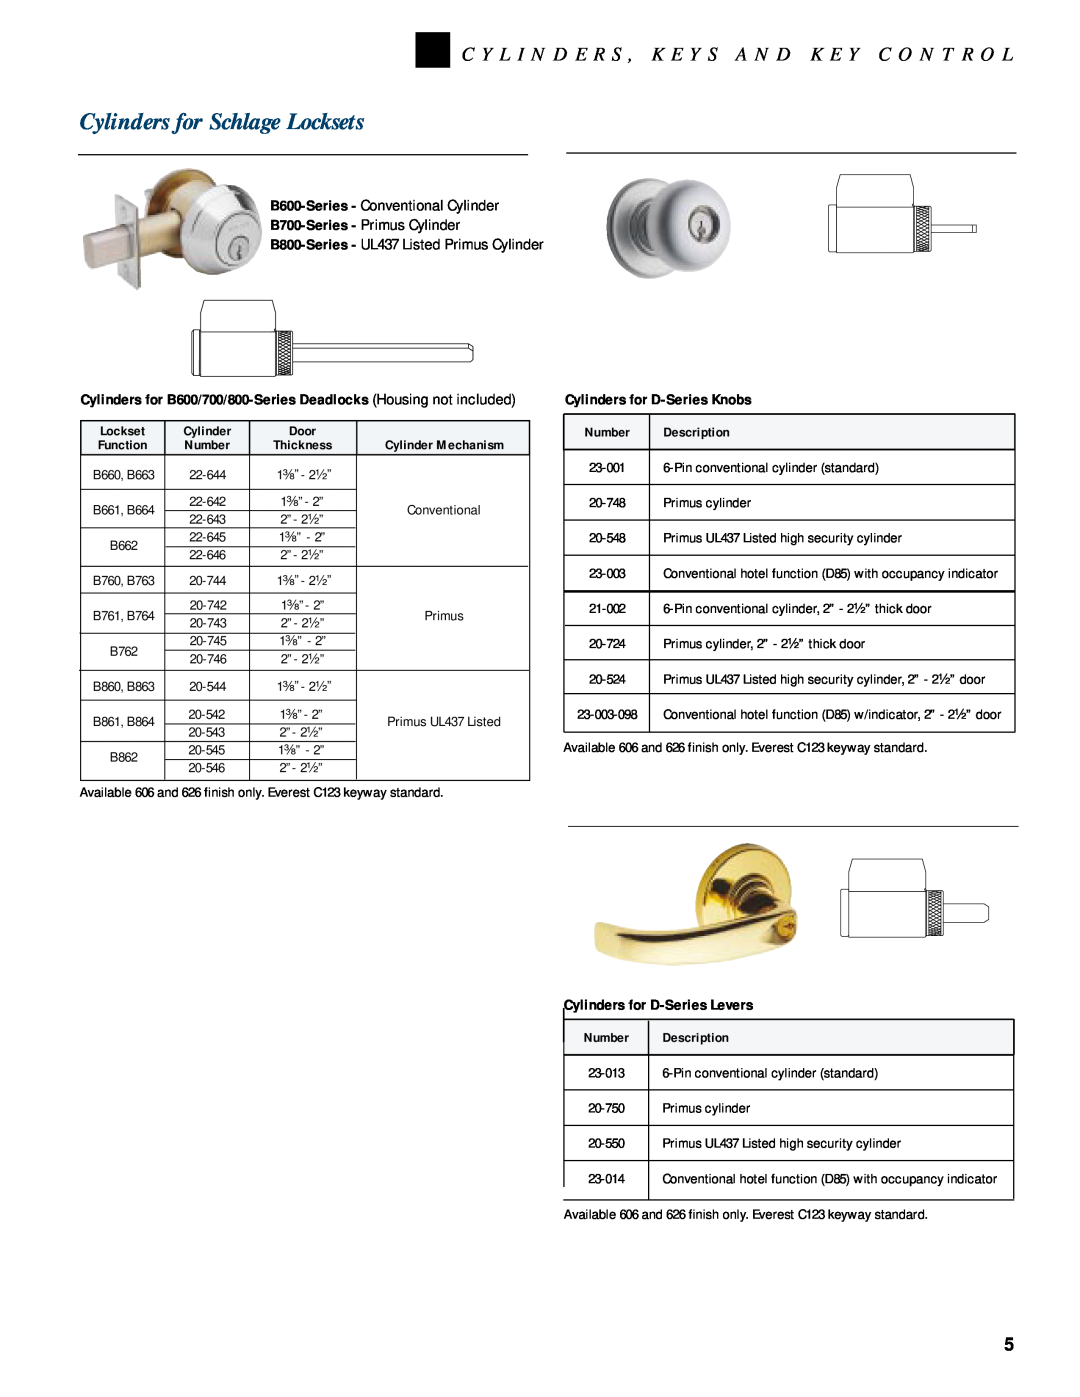 Schlage KEYS AND KEY CONTROL, CYLINDERS manual Cylinders for Schlage Locksets, B600-Series- Conventional Cylinder 